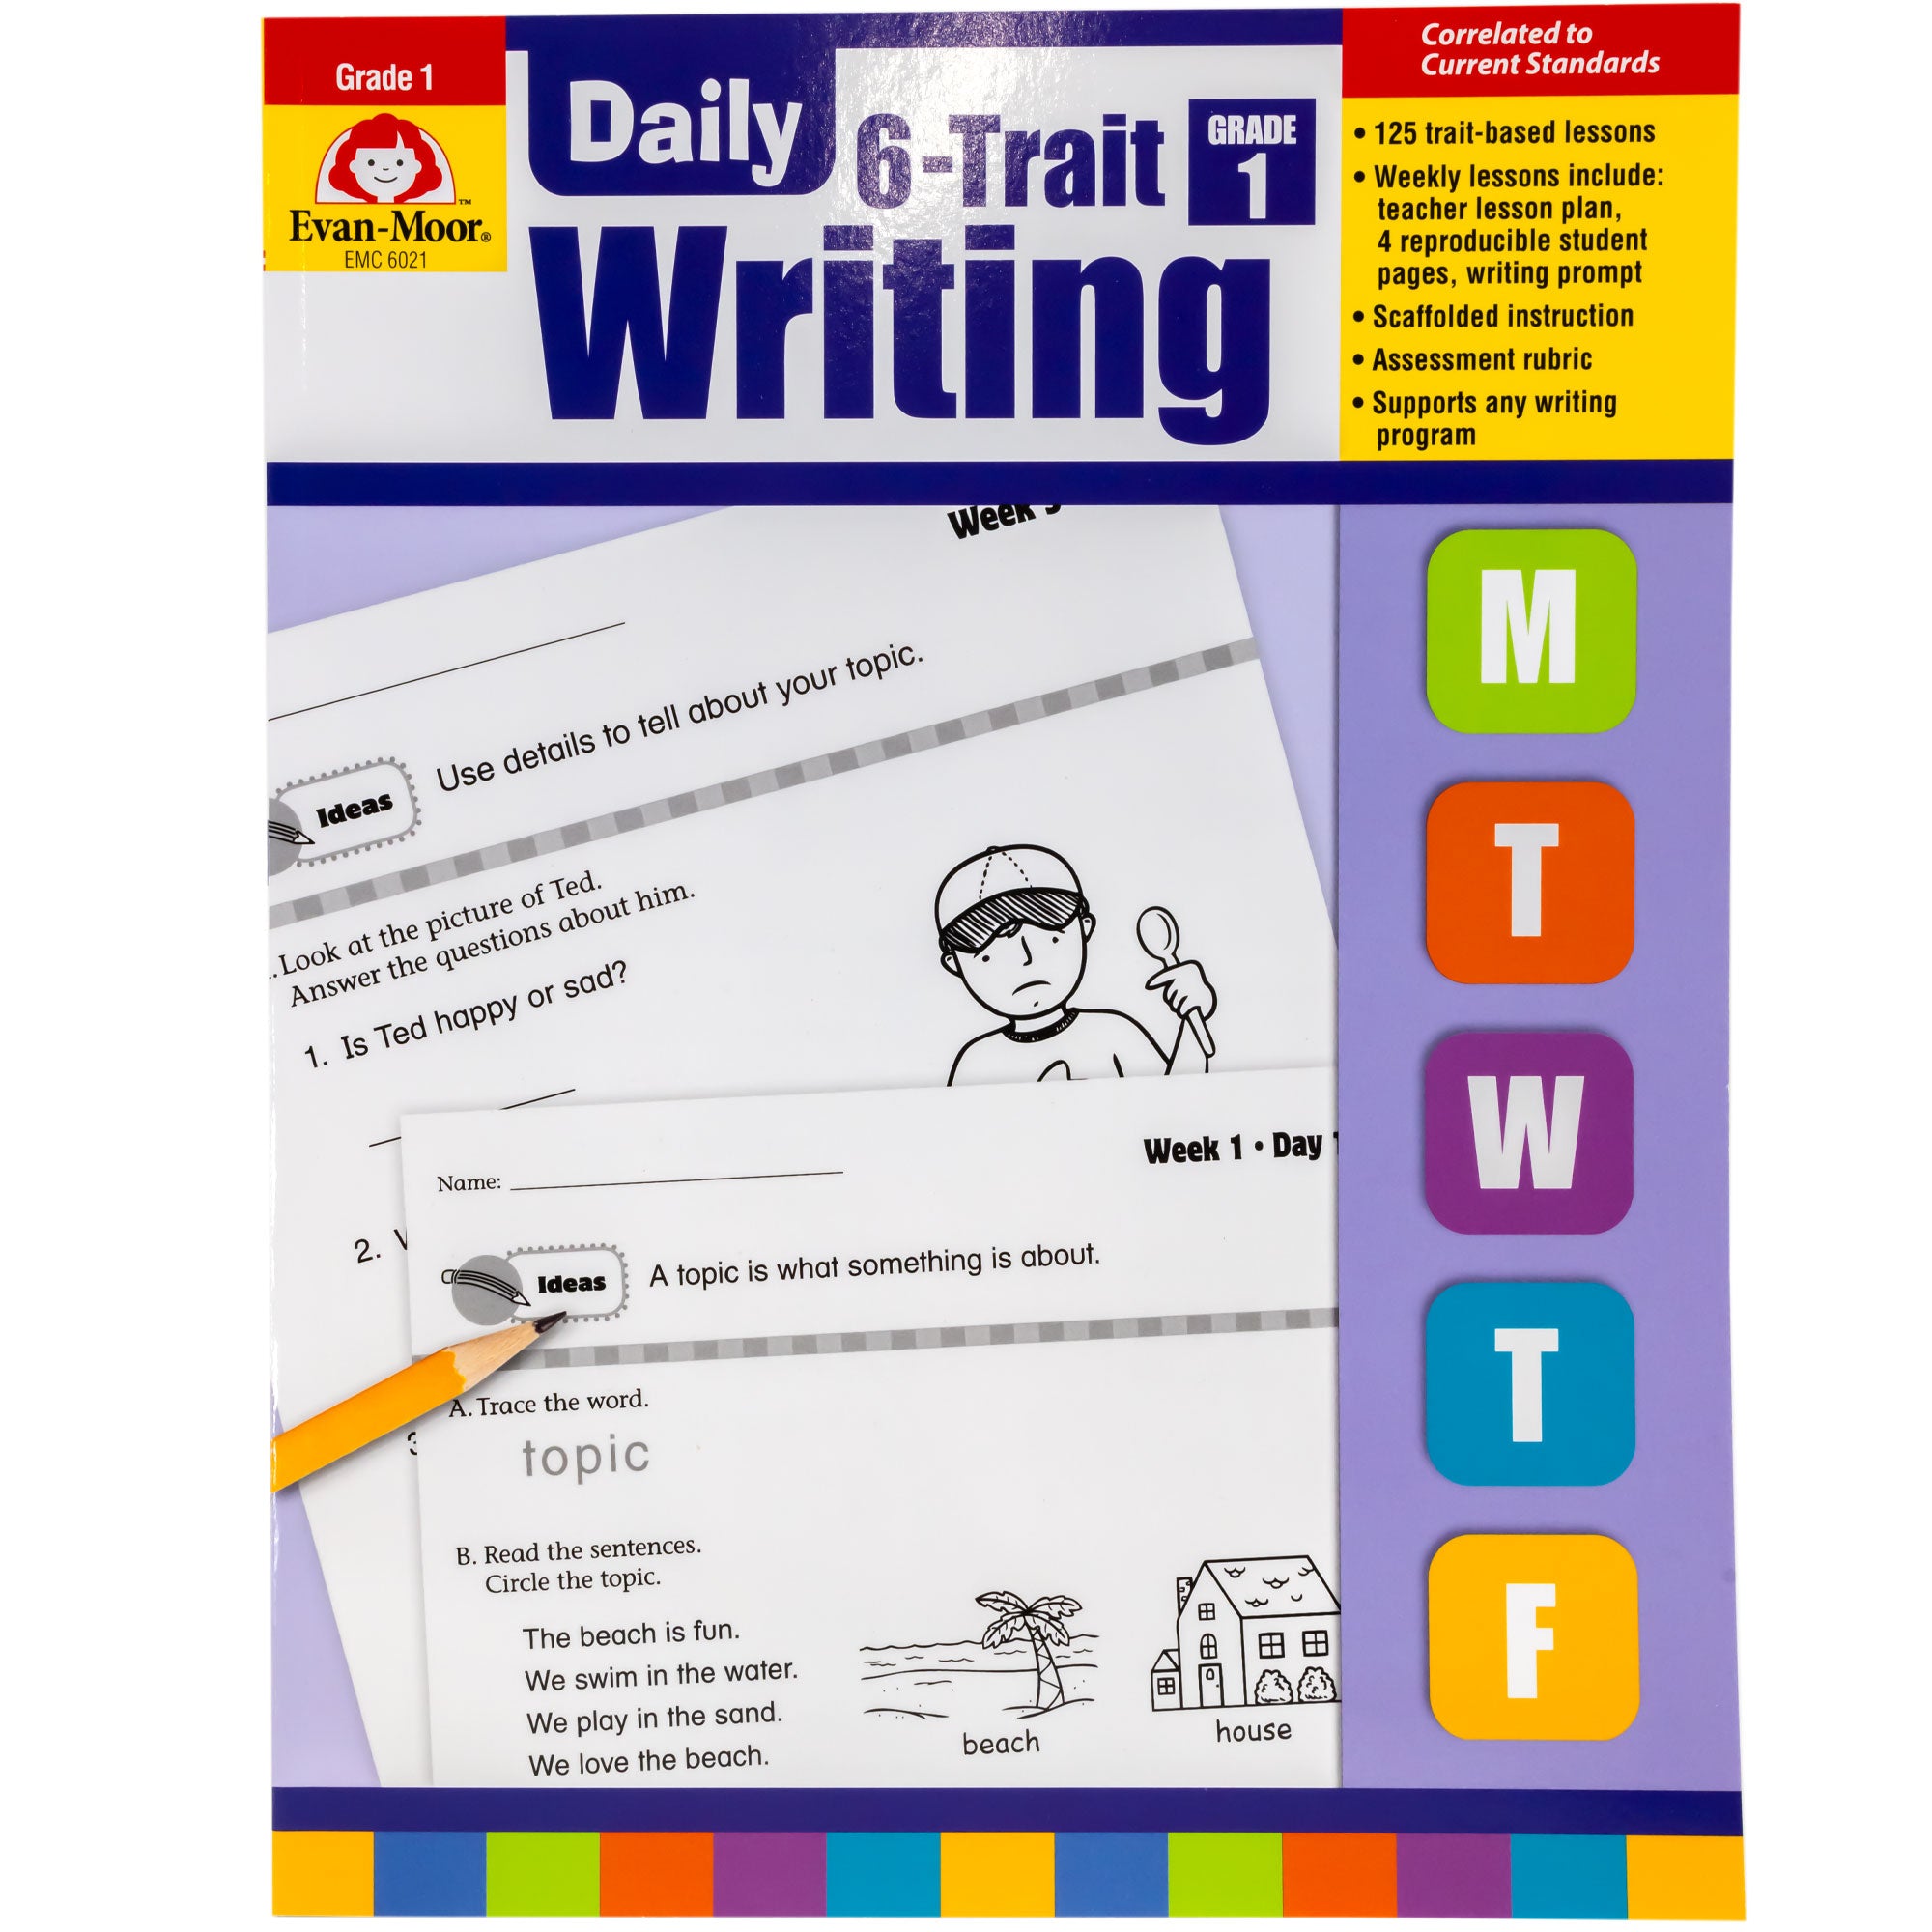 Daily 6 Trait Writing Grade 1 book. The background is white at the top, purple in the middle, and has a border at the bottom with many colored rectangles. There are colored squares off to the right with a letter in each square, including; M, T, W, T, F. There are 2 sample pages in the middle that show writing activities and illustrations.